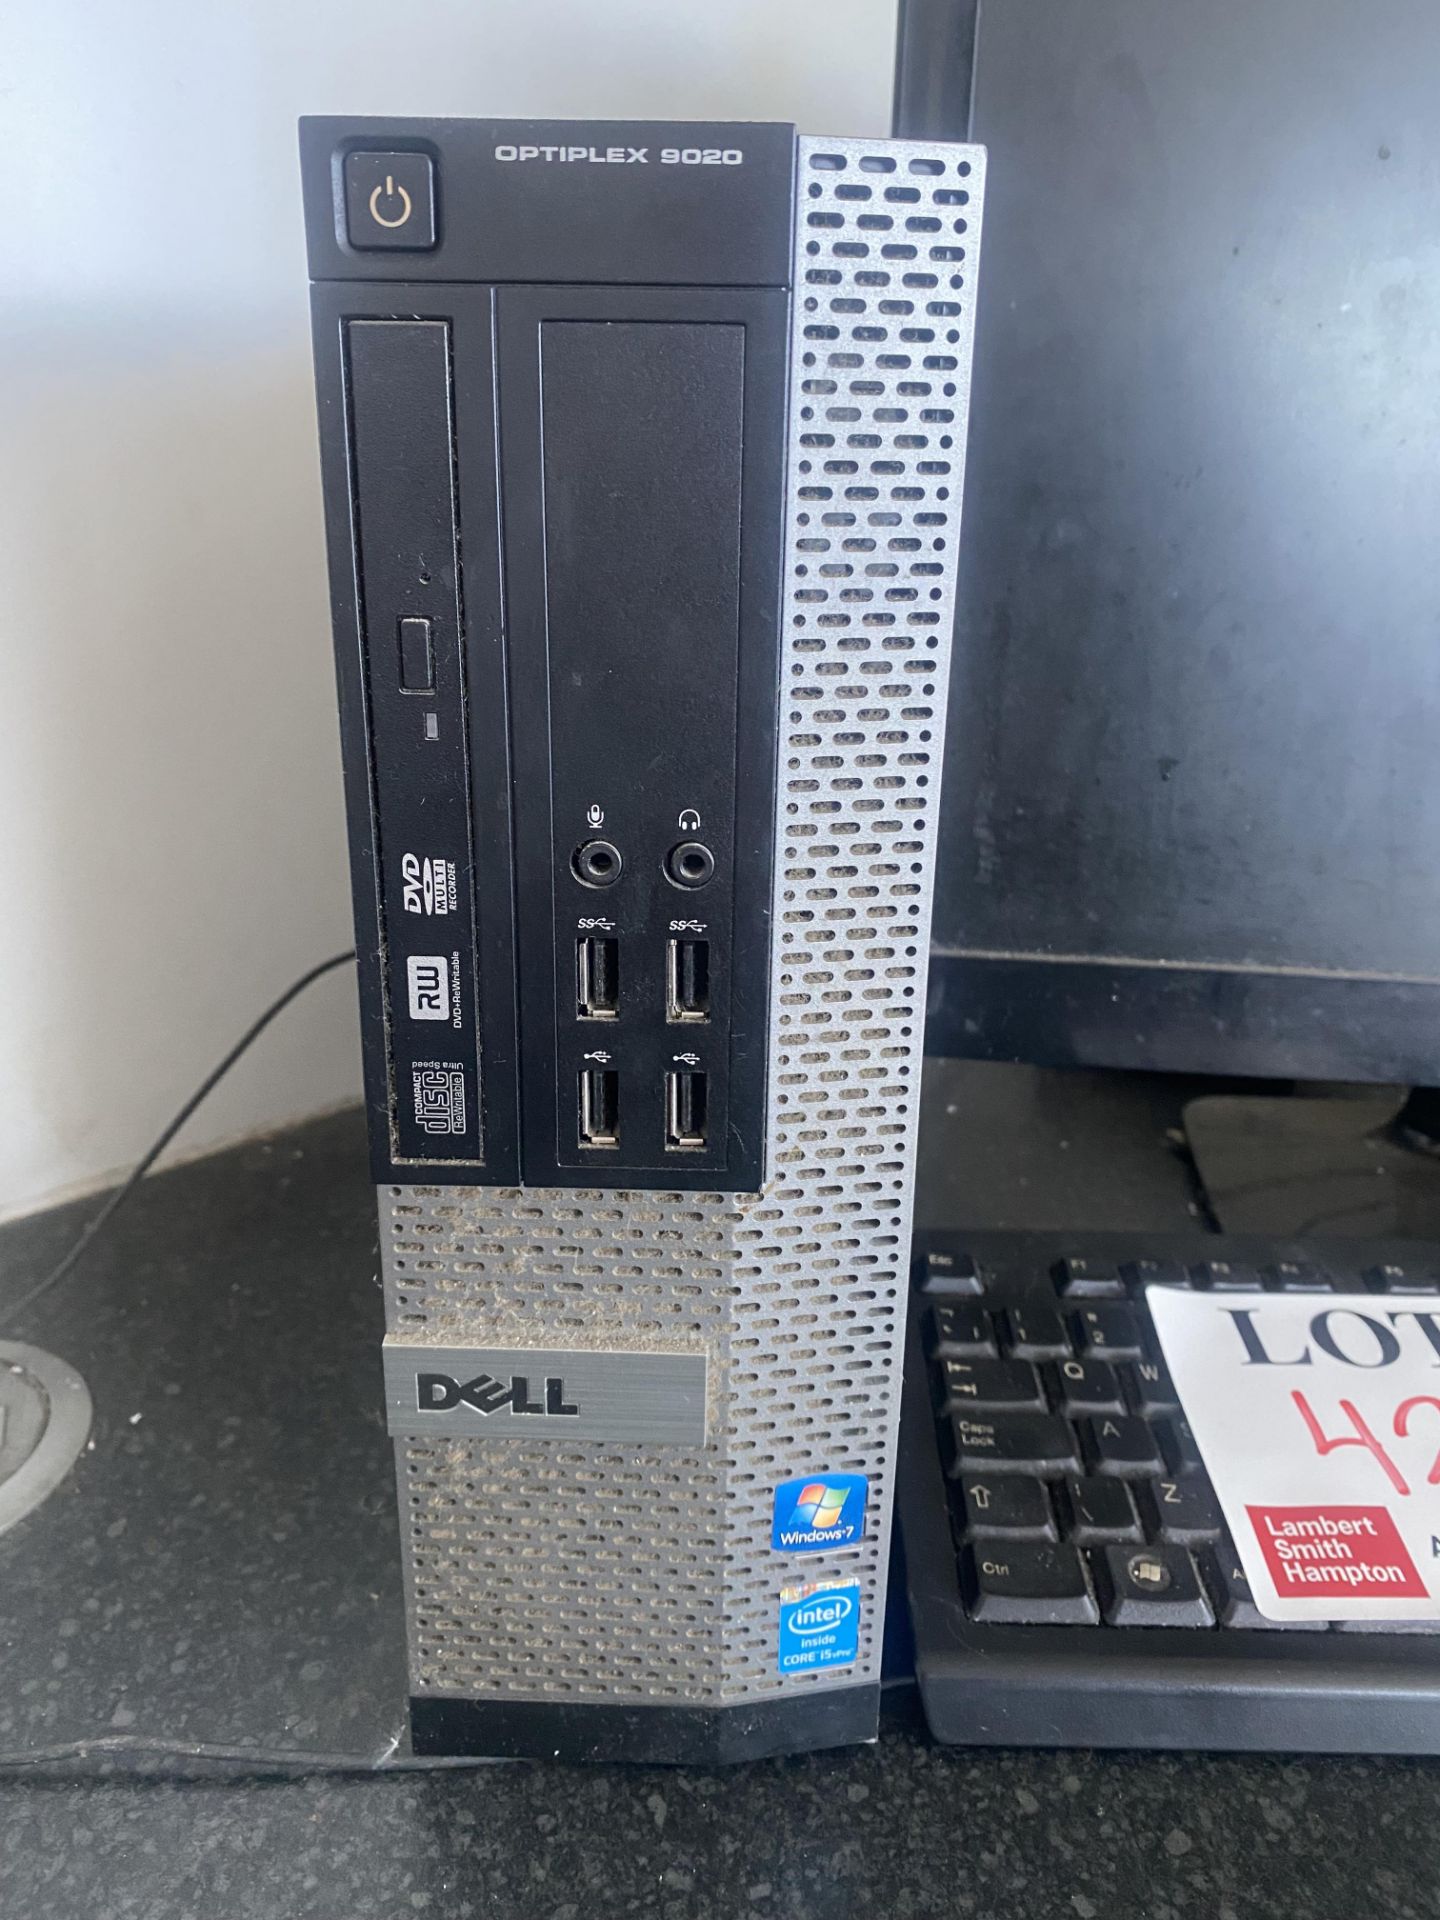 HP HP2211X monitor, Dell Optiplex 9020 PC with keyboard and mouse - Image 3 of 4